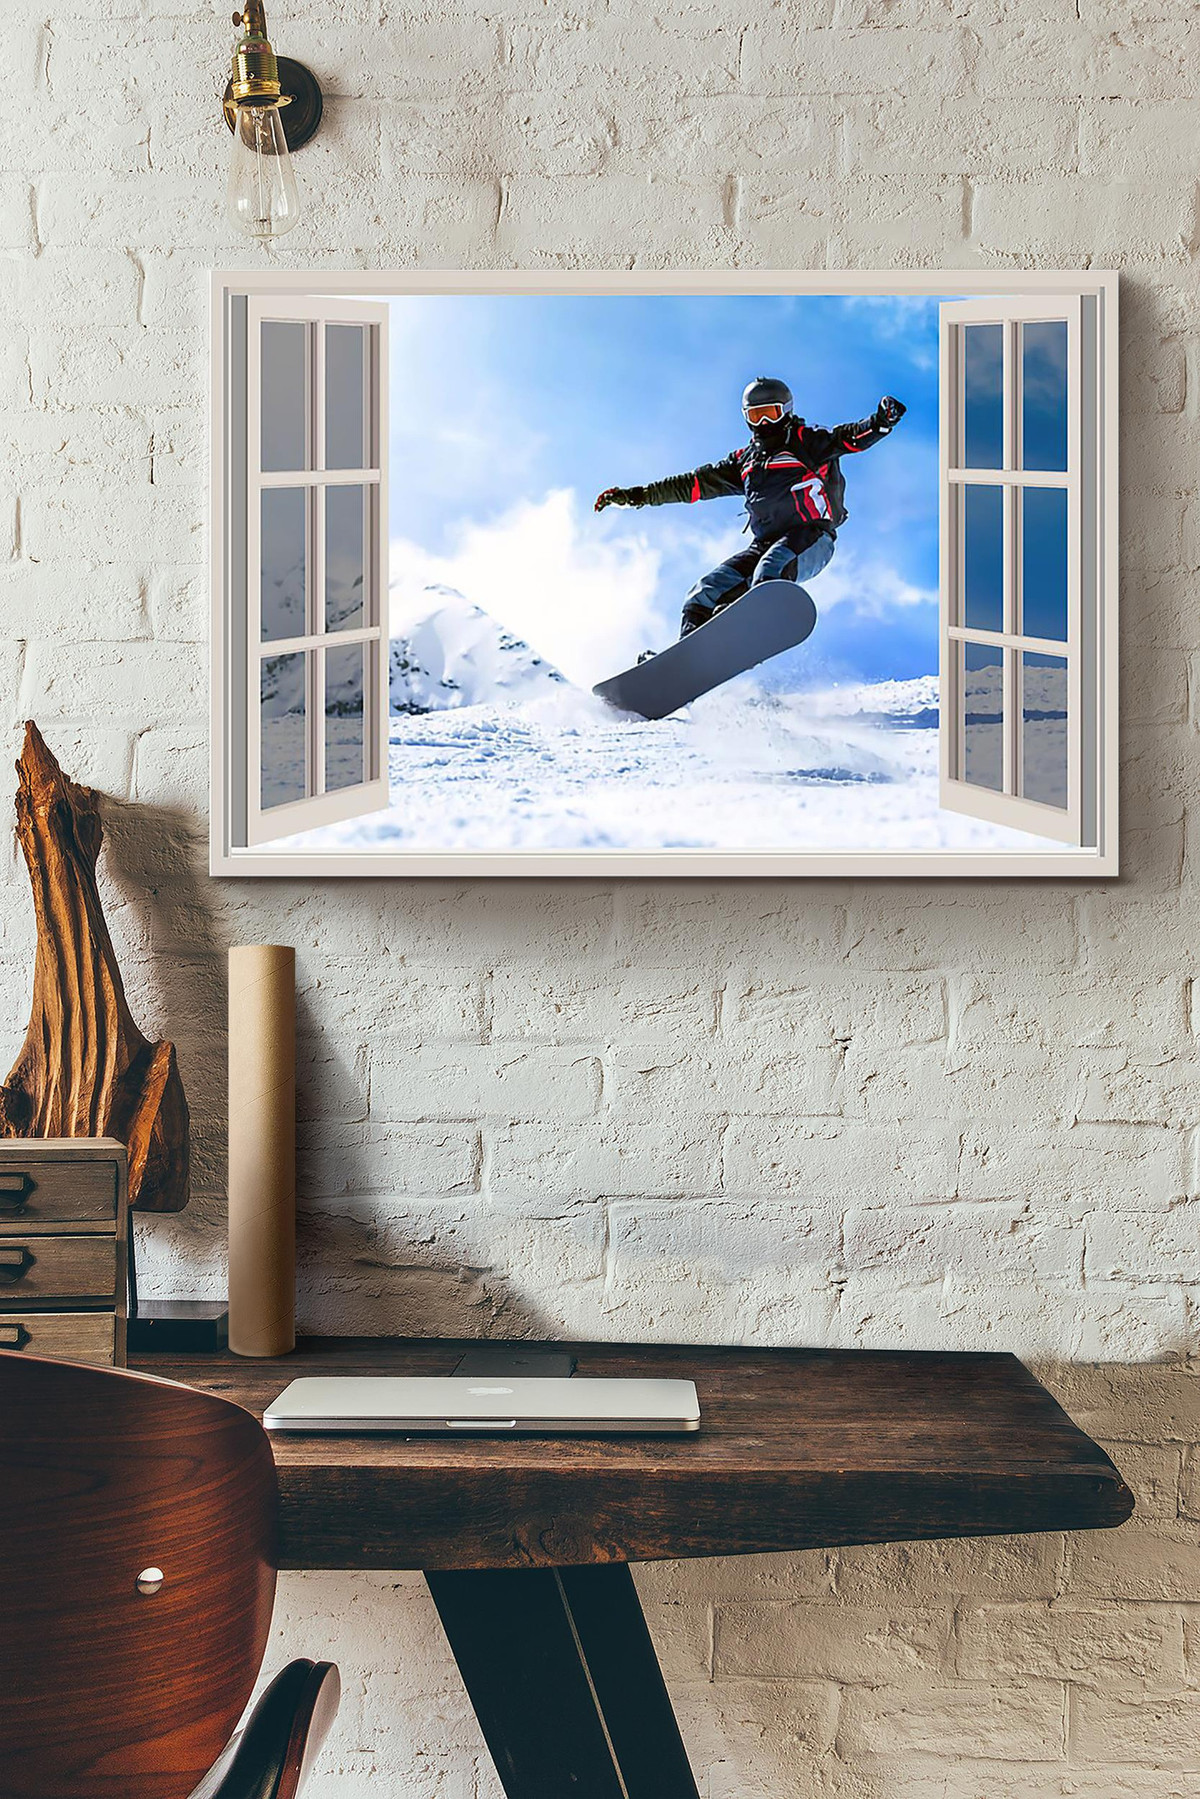 Skiing Vintage 3D Window View Gift Idea Decor Framed Prints, Canvas Paintings Wrapped Canvas 8x10